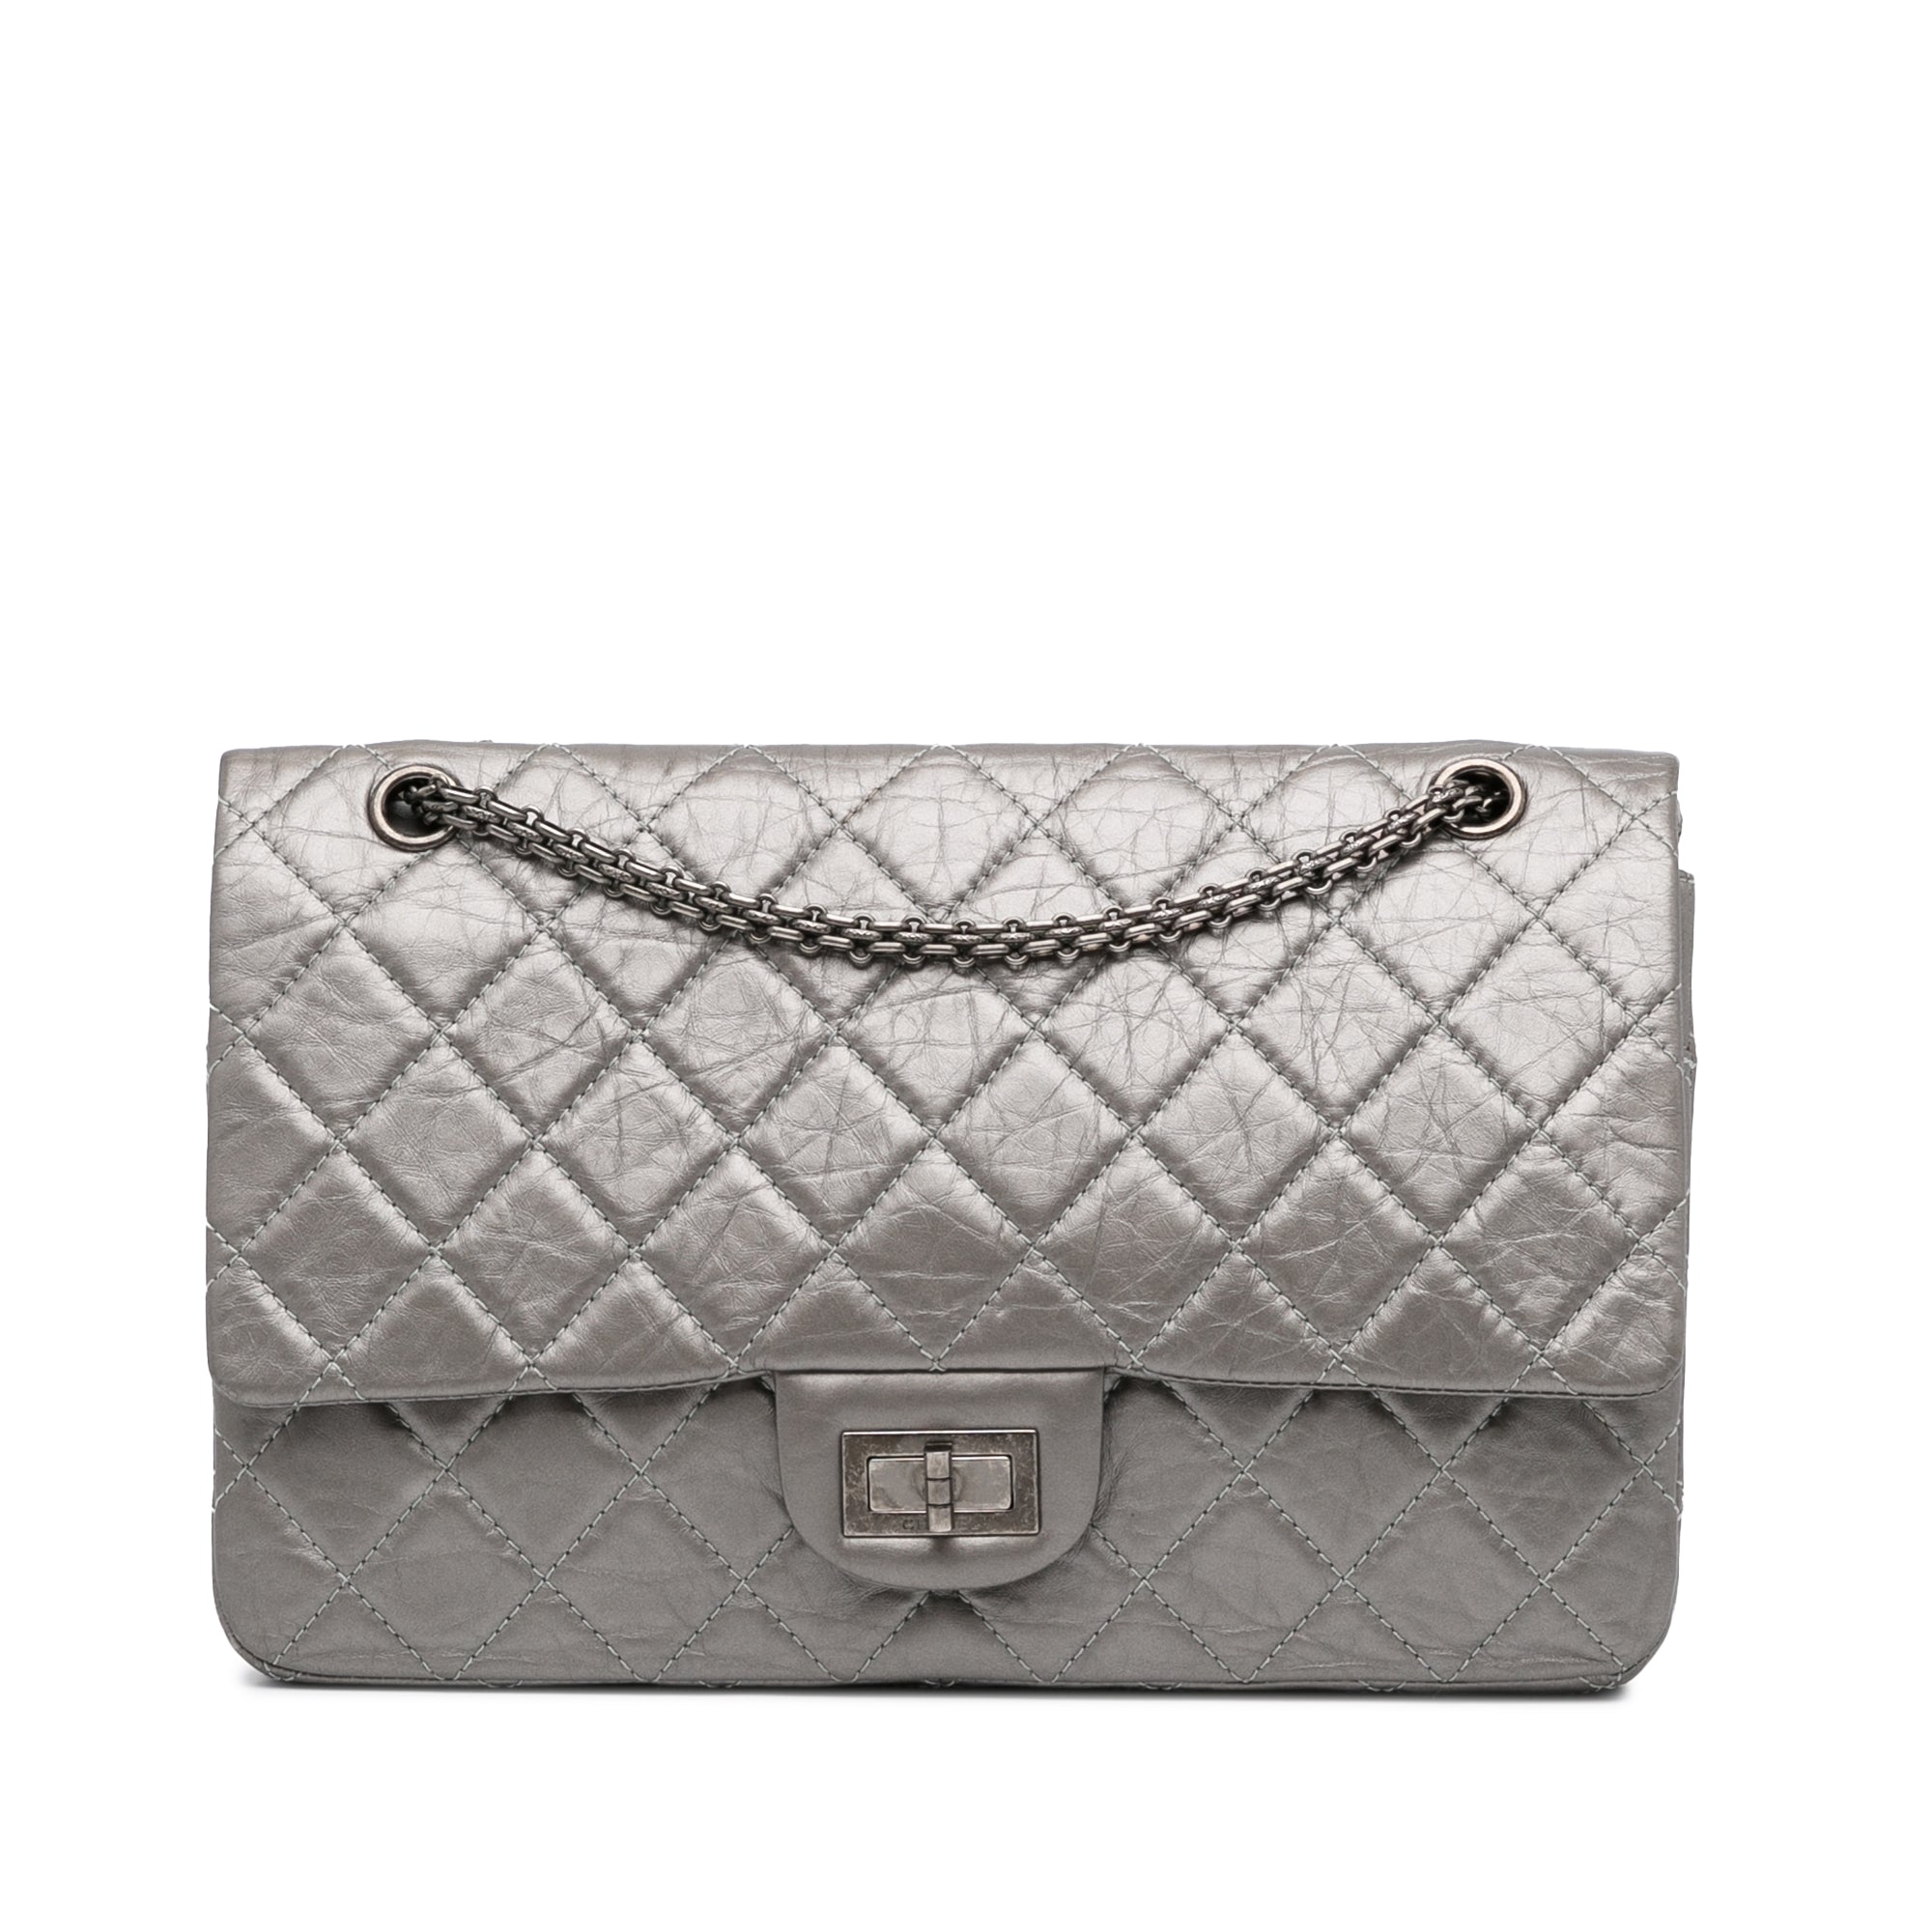 Silver Chanel Reissue 2.55 Aged Calfskin Double Flap 227 Shoulder